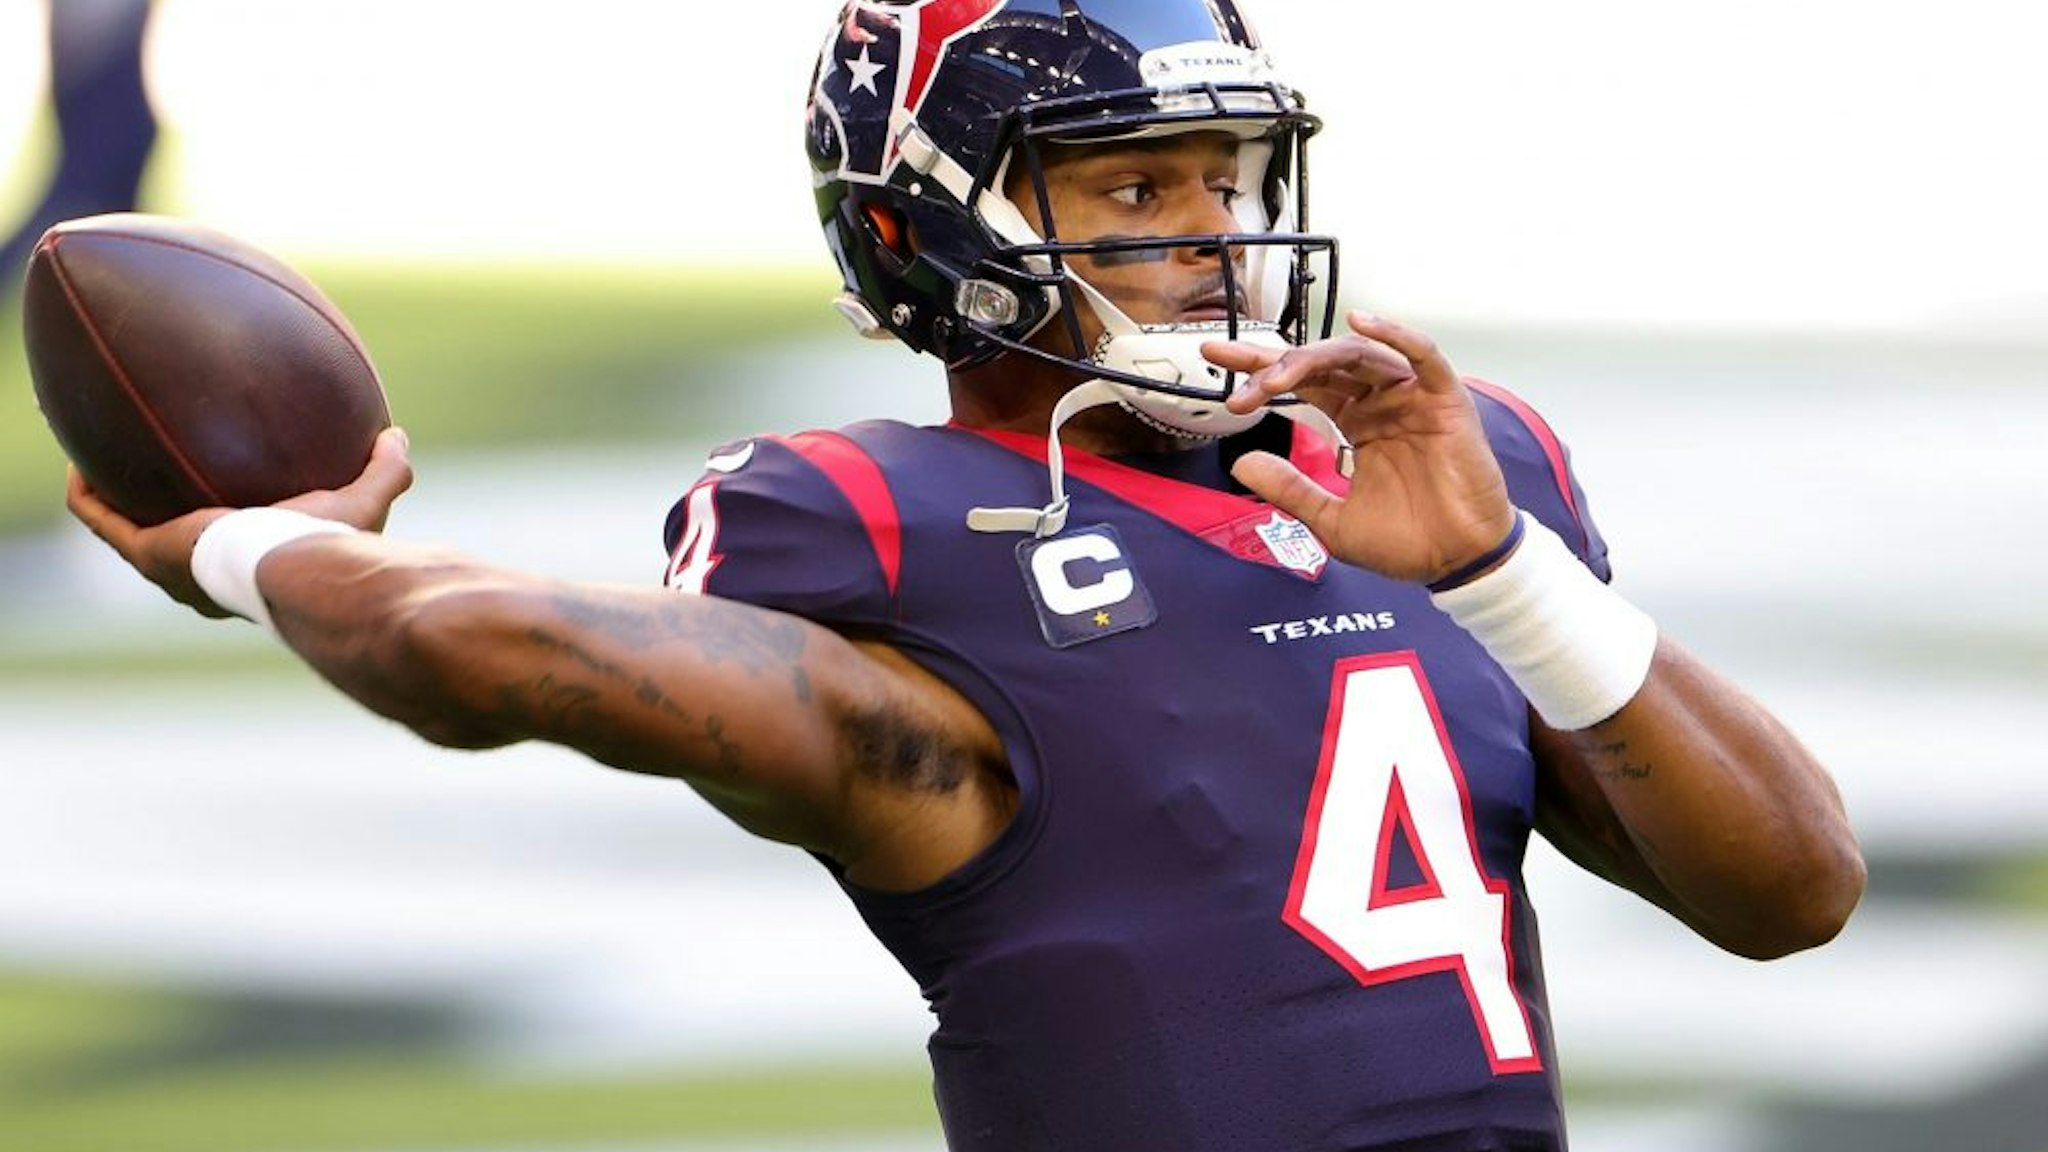 HOUSTON, TEXAS - JANUARY 03: Deshaun Watson #4 of the Houston Texans participates in warmups prior to a game against the Tennessee Titans at NRG Stadium on January 03, 2021 in Houston, Texas.